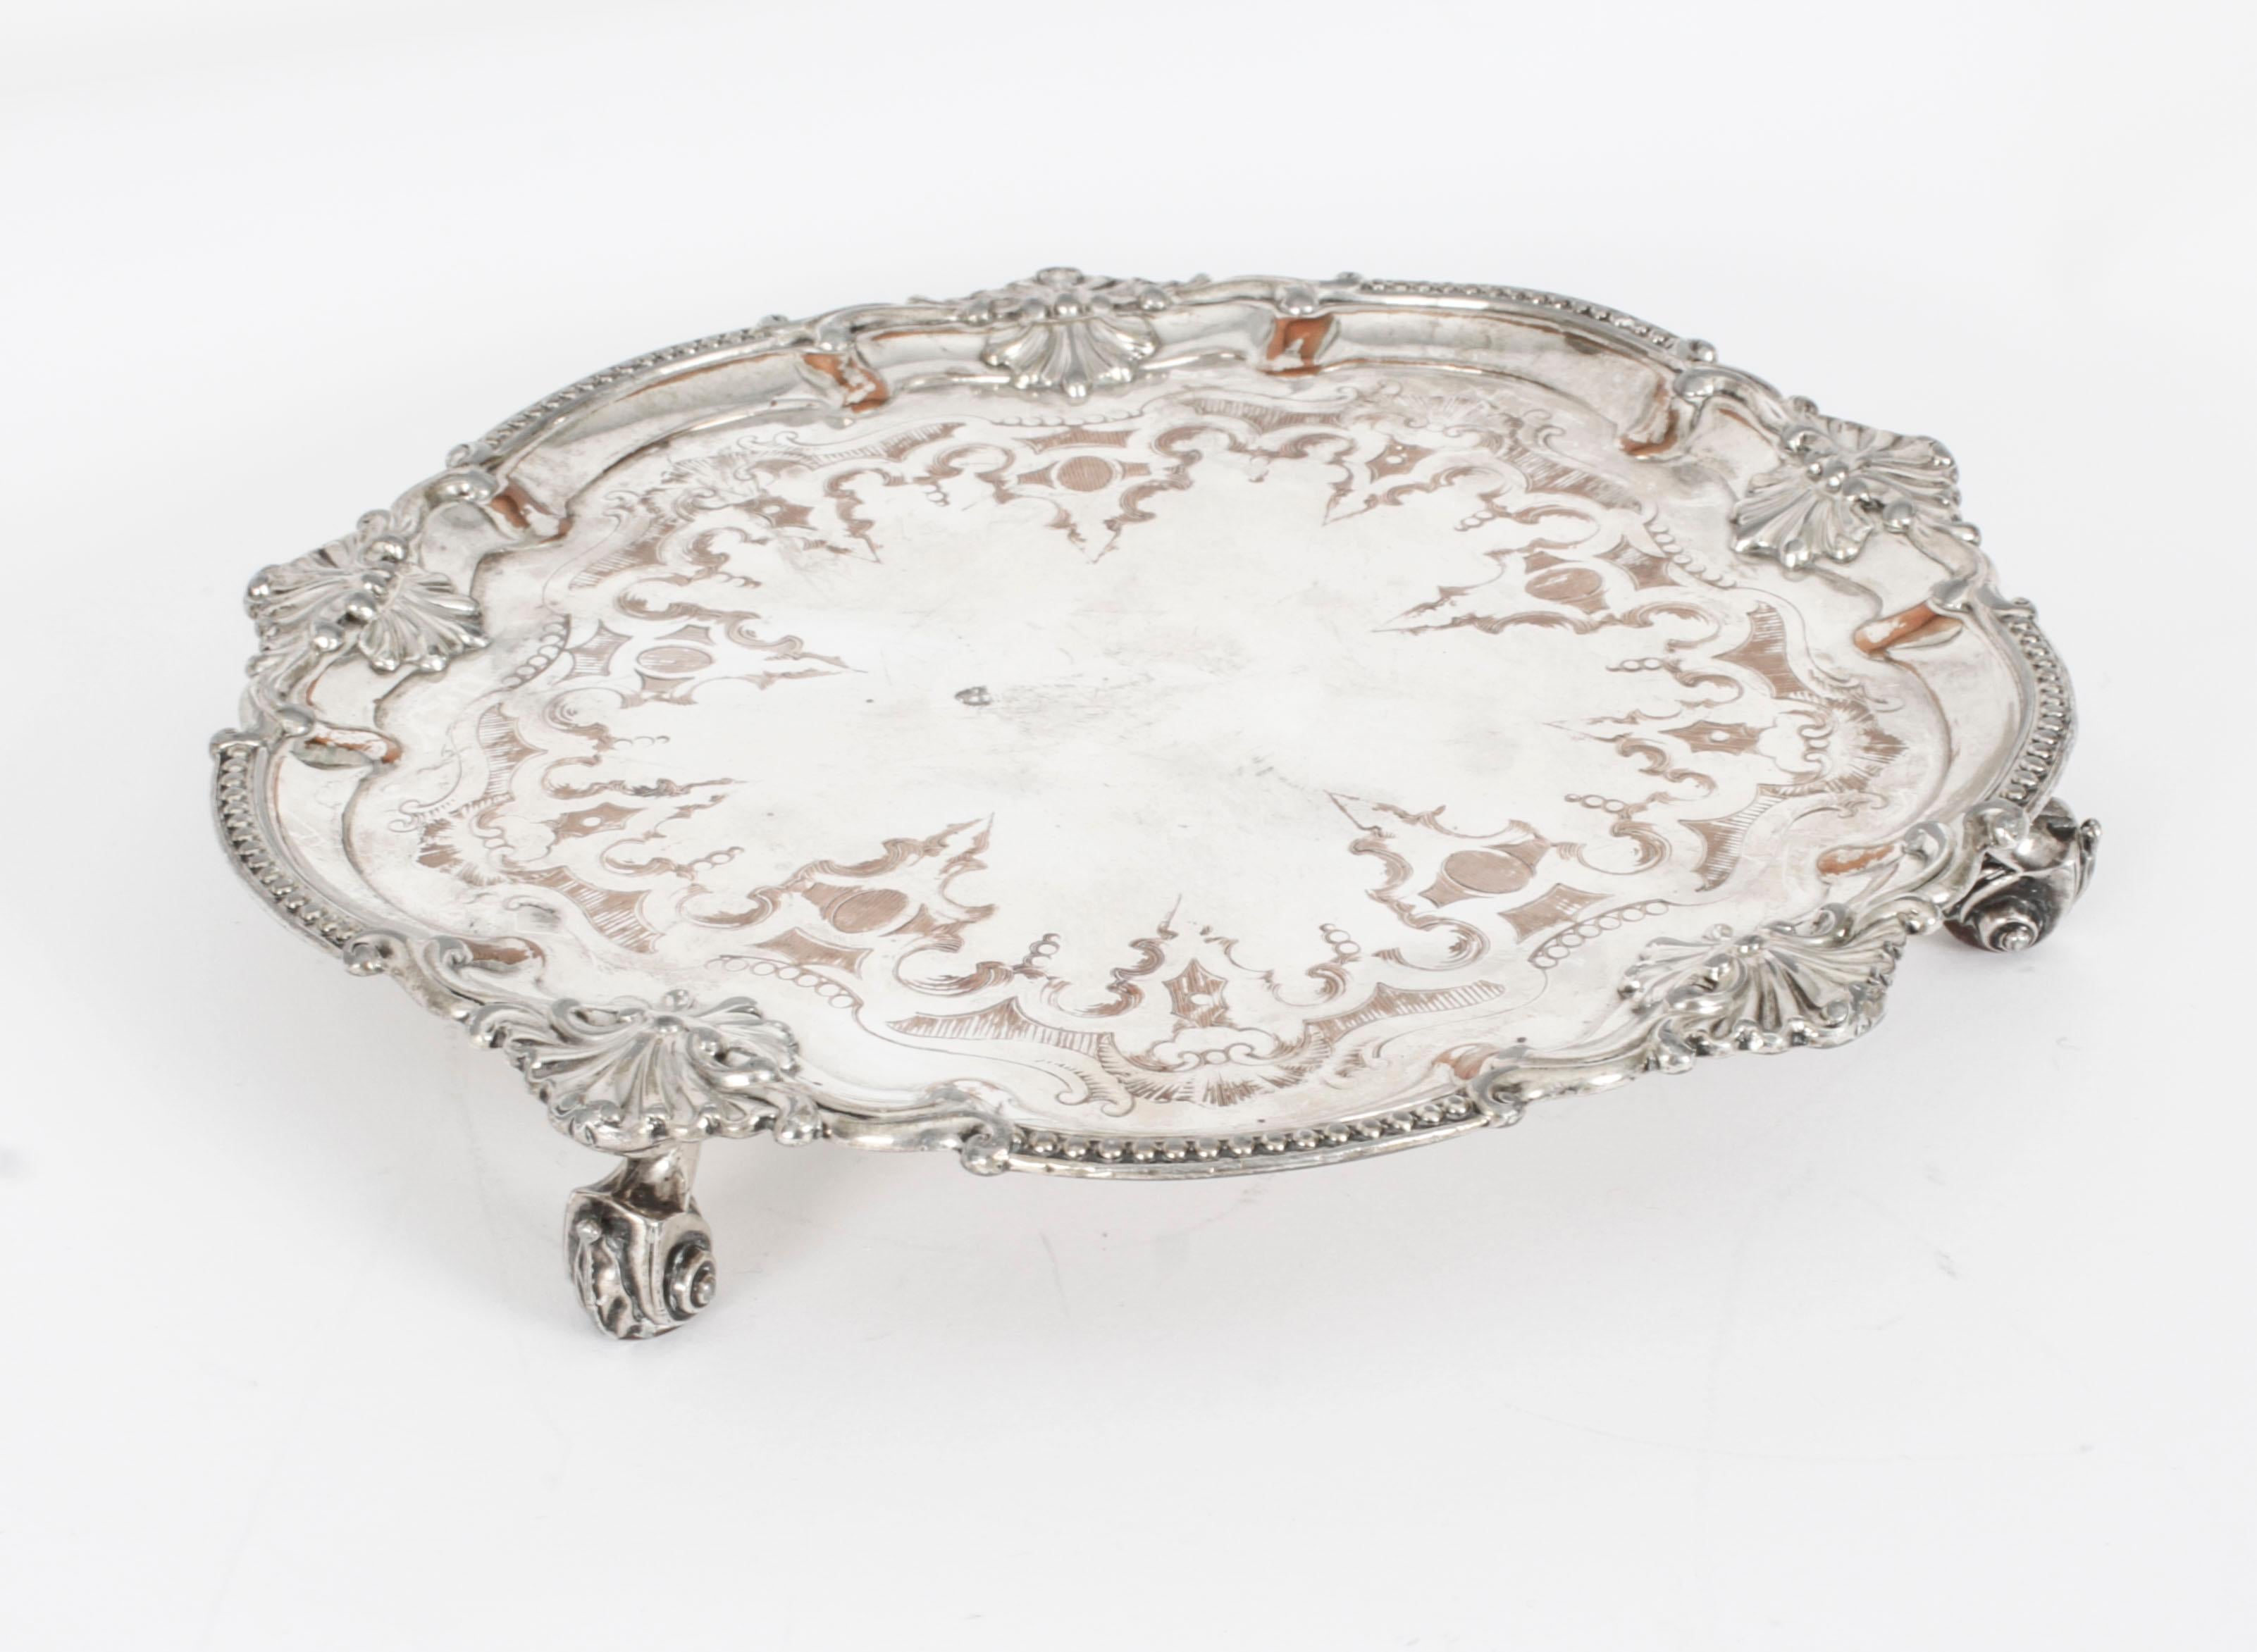 This is an exquisite English antique old Sheffield plate salver, circa 1780 in date.
 
The elegant raised pie crust border shaped salver features hand chased foliate engraving and sits on three cast reticulated feet.
 
Add an elegant touch to